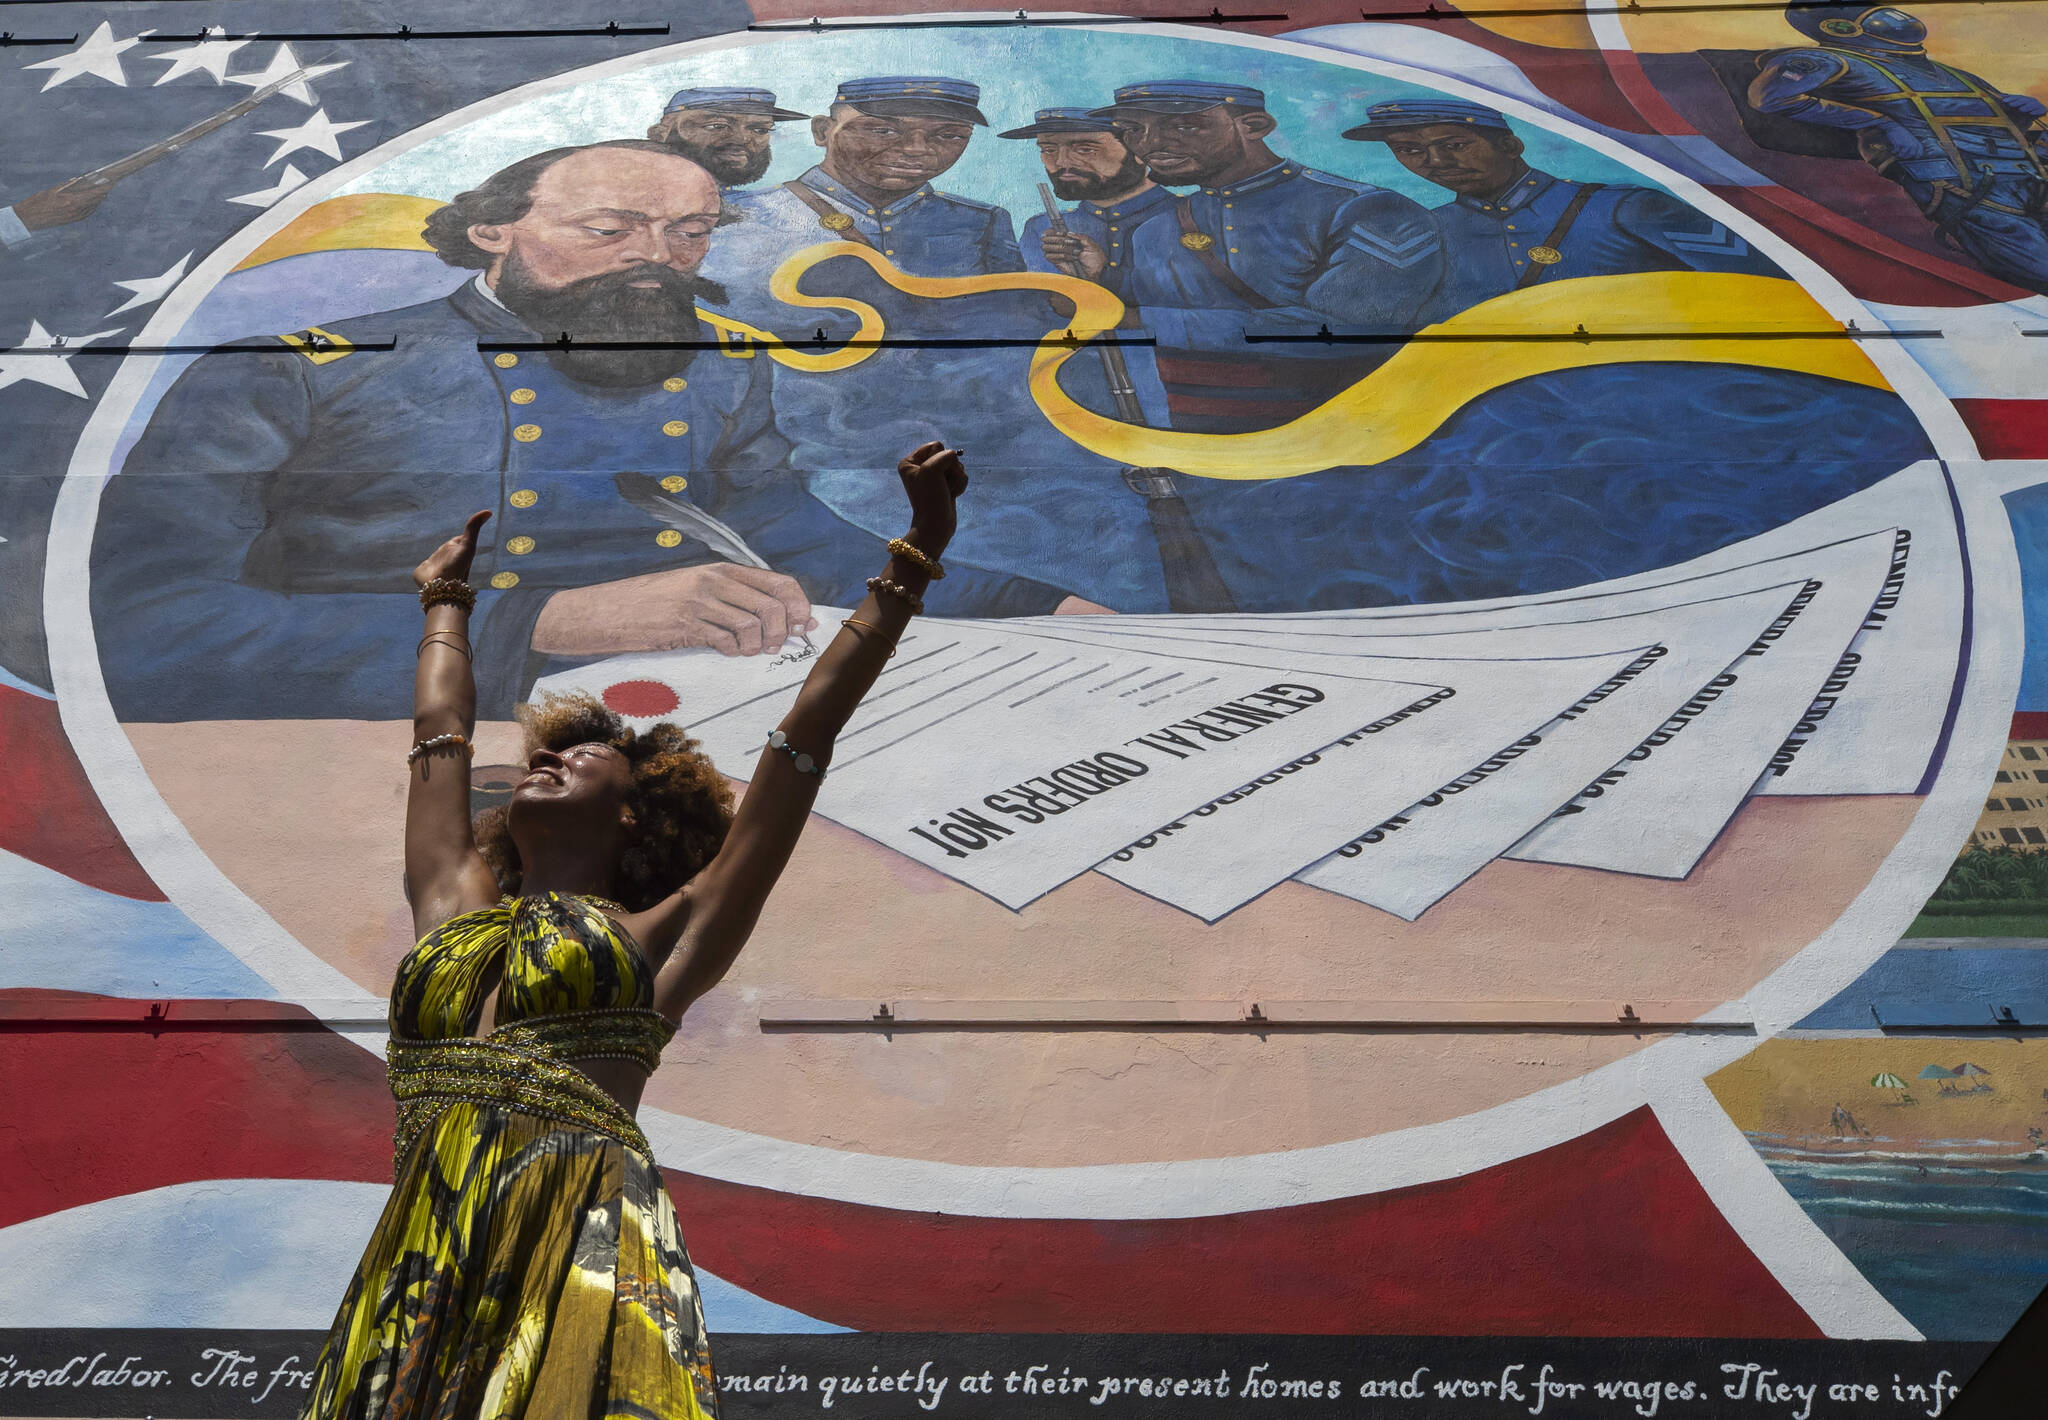 Dancer Prescylia Mae, of Houston, performs during a dedication ceremony for the mural “Absolute Equality” in downtown Galveston, Texas, on June 19, 2021. Recognition of Juneteenth, the effective end of slavery in the U.S., gained traction after the police killing of George Floyd in 2020. But after an initial burst of action, the movement to have it recognized as an official holiday in the states has largely stalled. (Stuart Villanueva / The Galveston County Daily News)